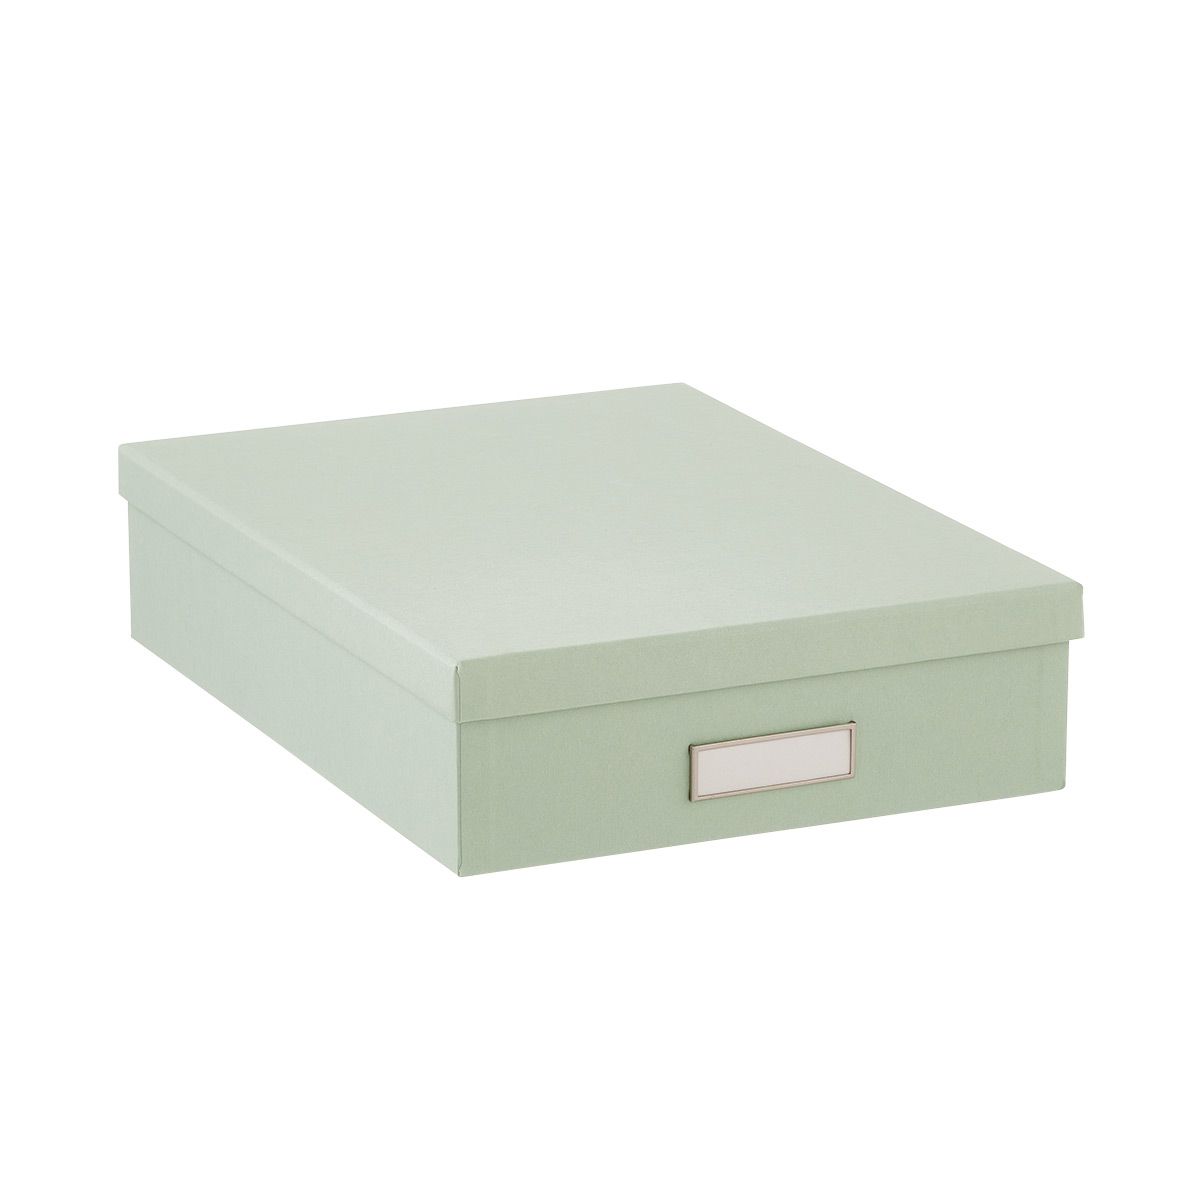 Bigso Stockholm Office Storage Boxes | The Container Store